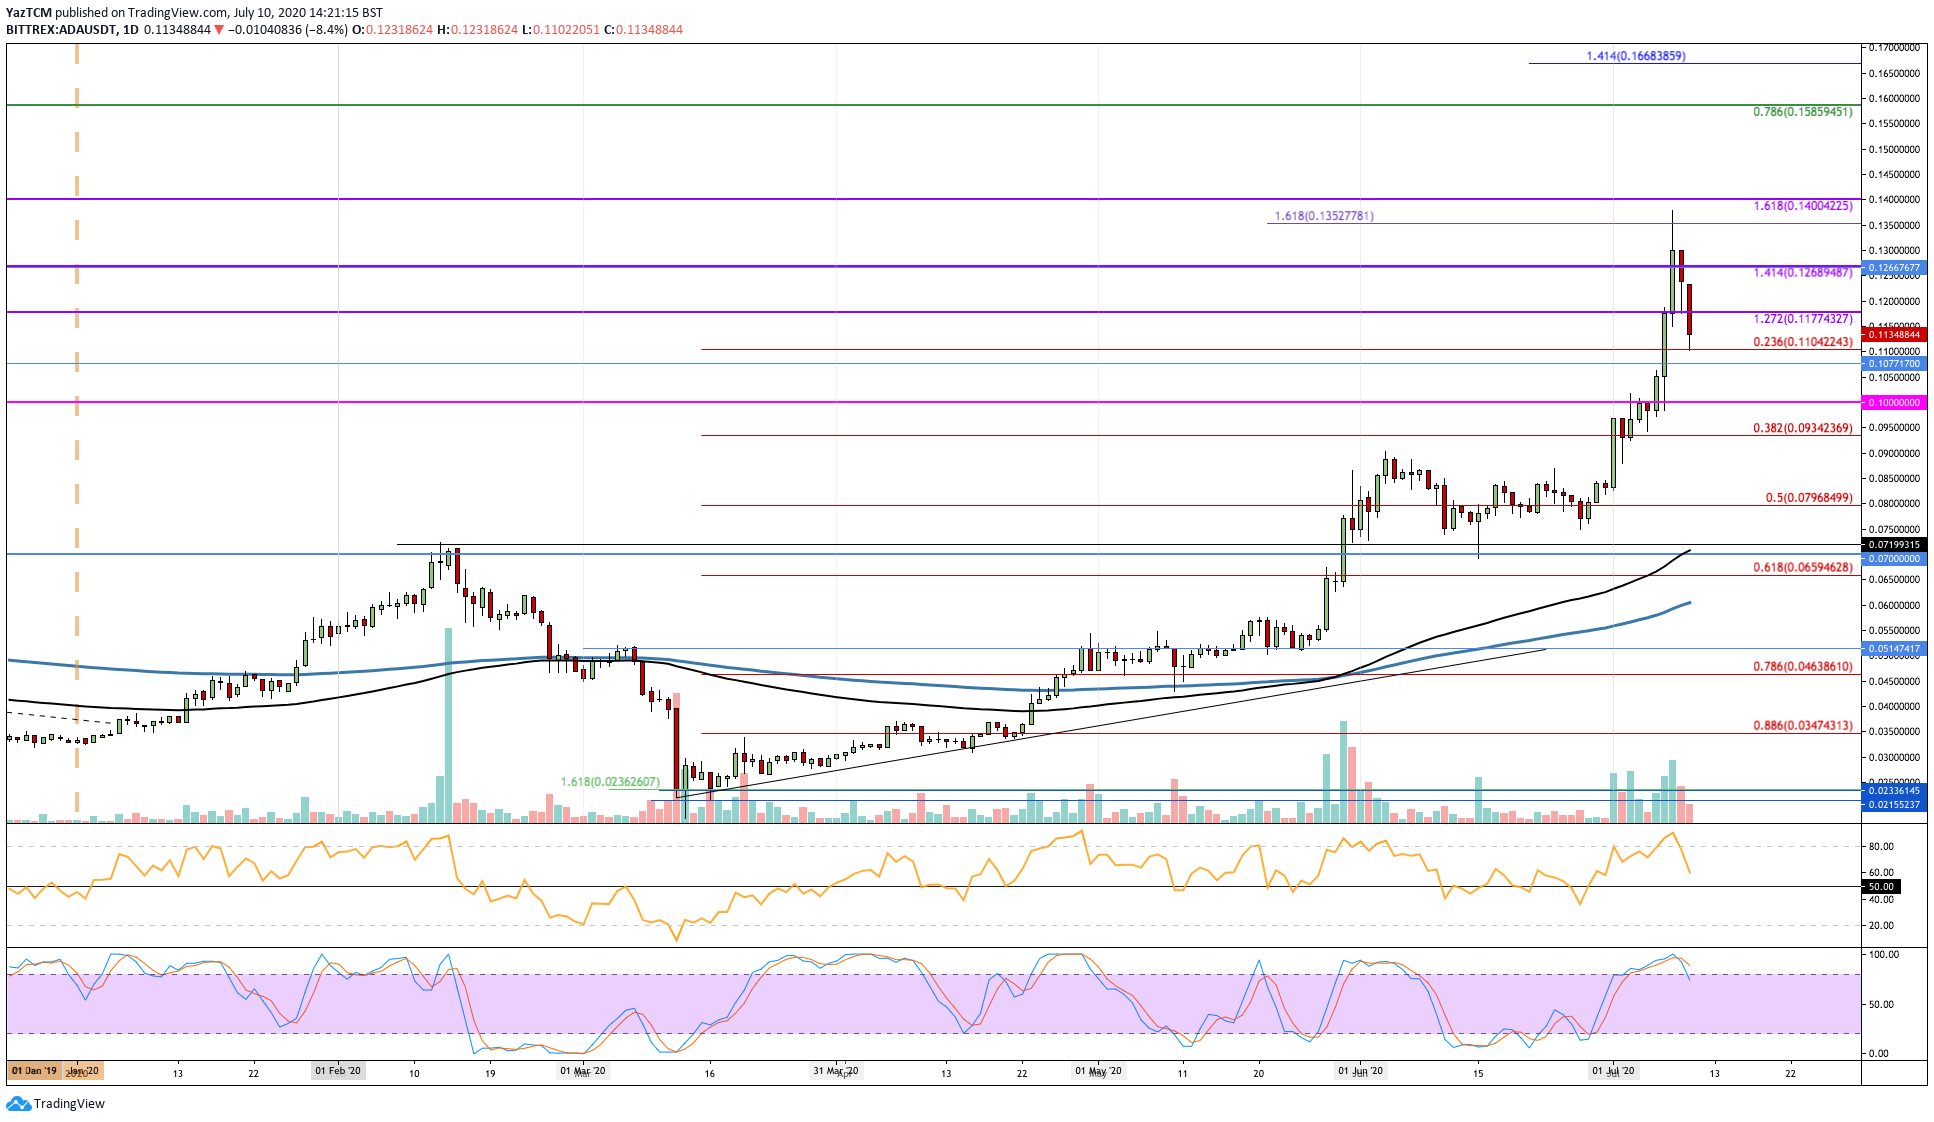 Crypto Price Analysis & Overview July 10: Bitcoin, Ethereum, Ripple, Cardano,and Doge